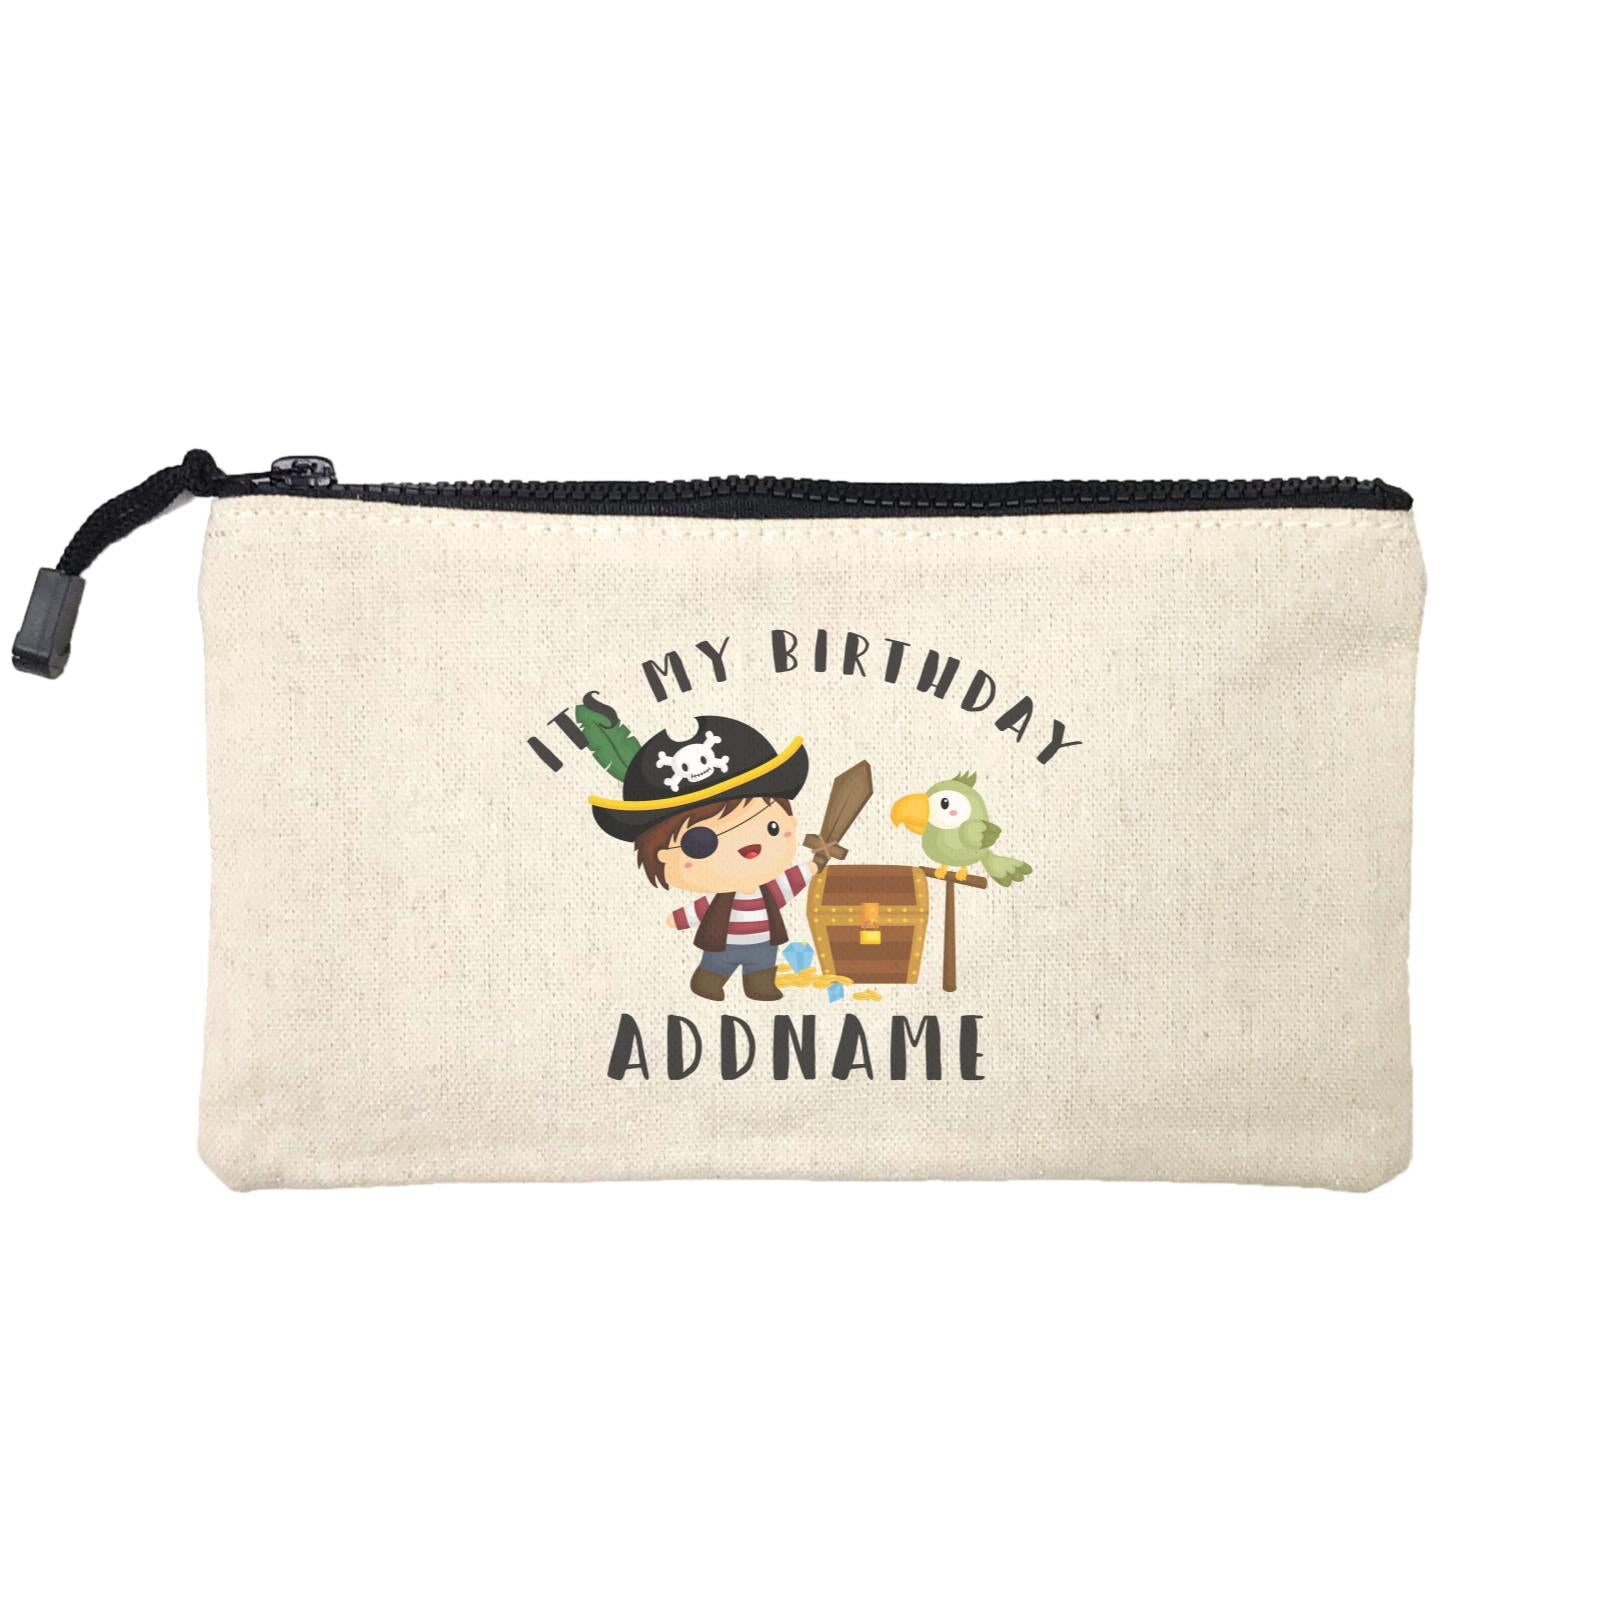 Birthday Pirate Happy Boy Captain With Treasure Chest Its My Birthday Addname Mini Accessories Stationery Pouch